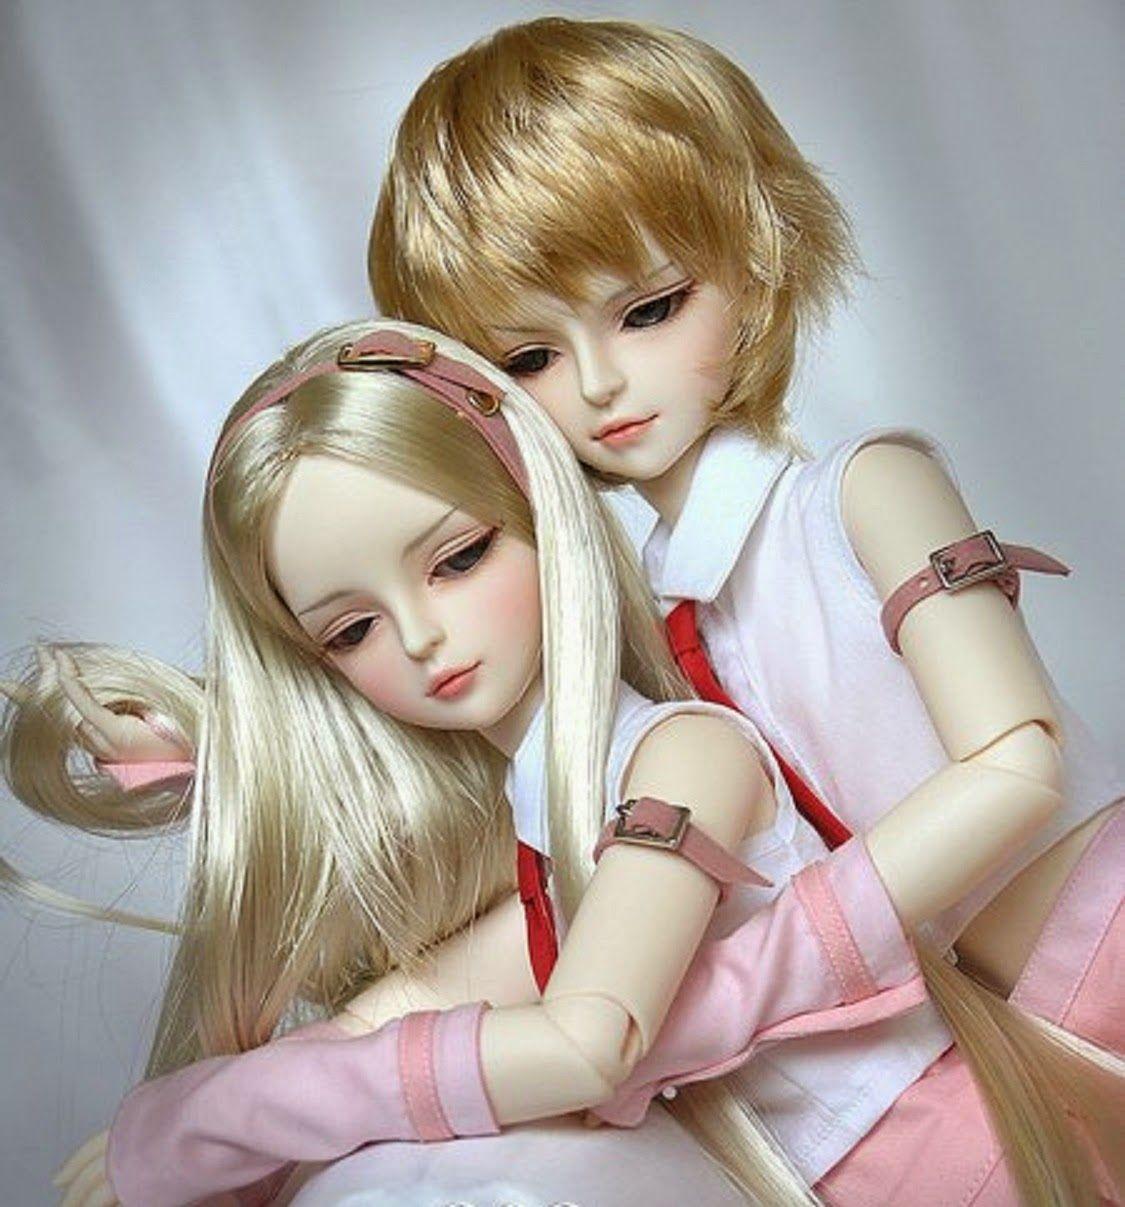 With doll real love best adult free image